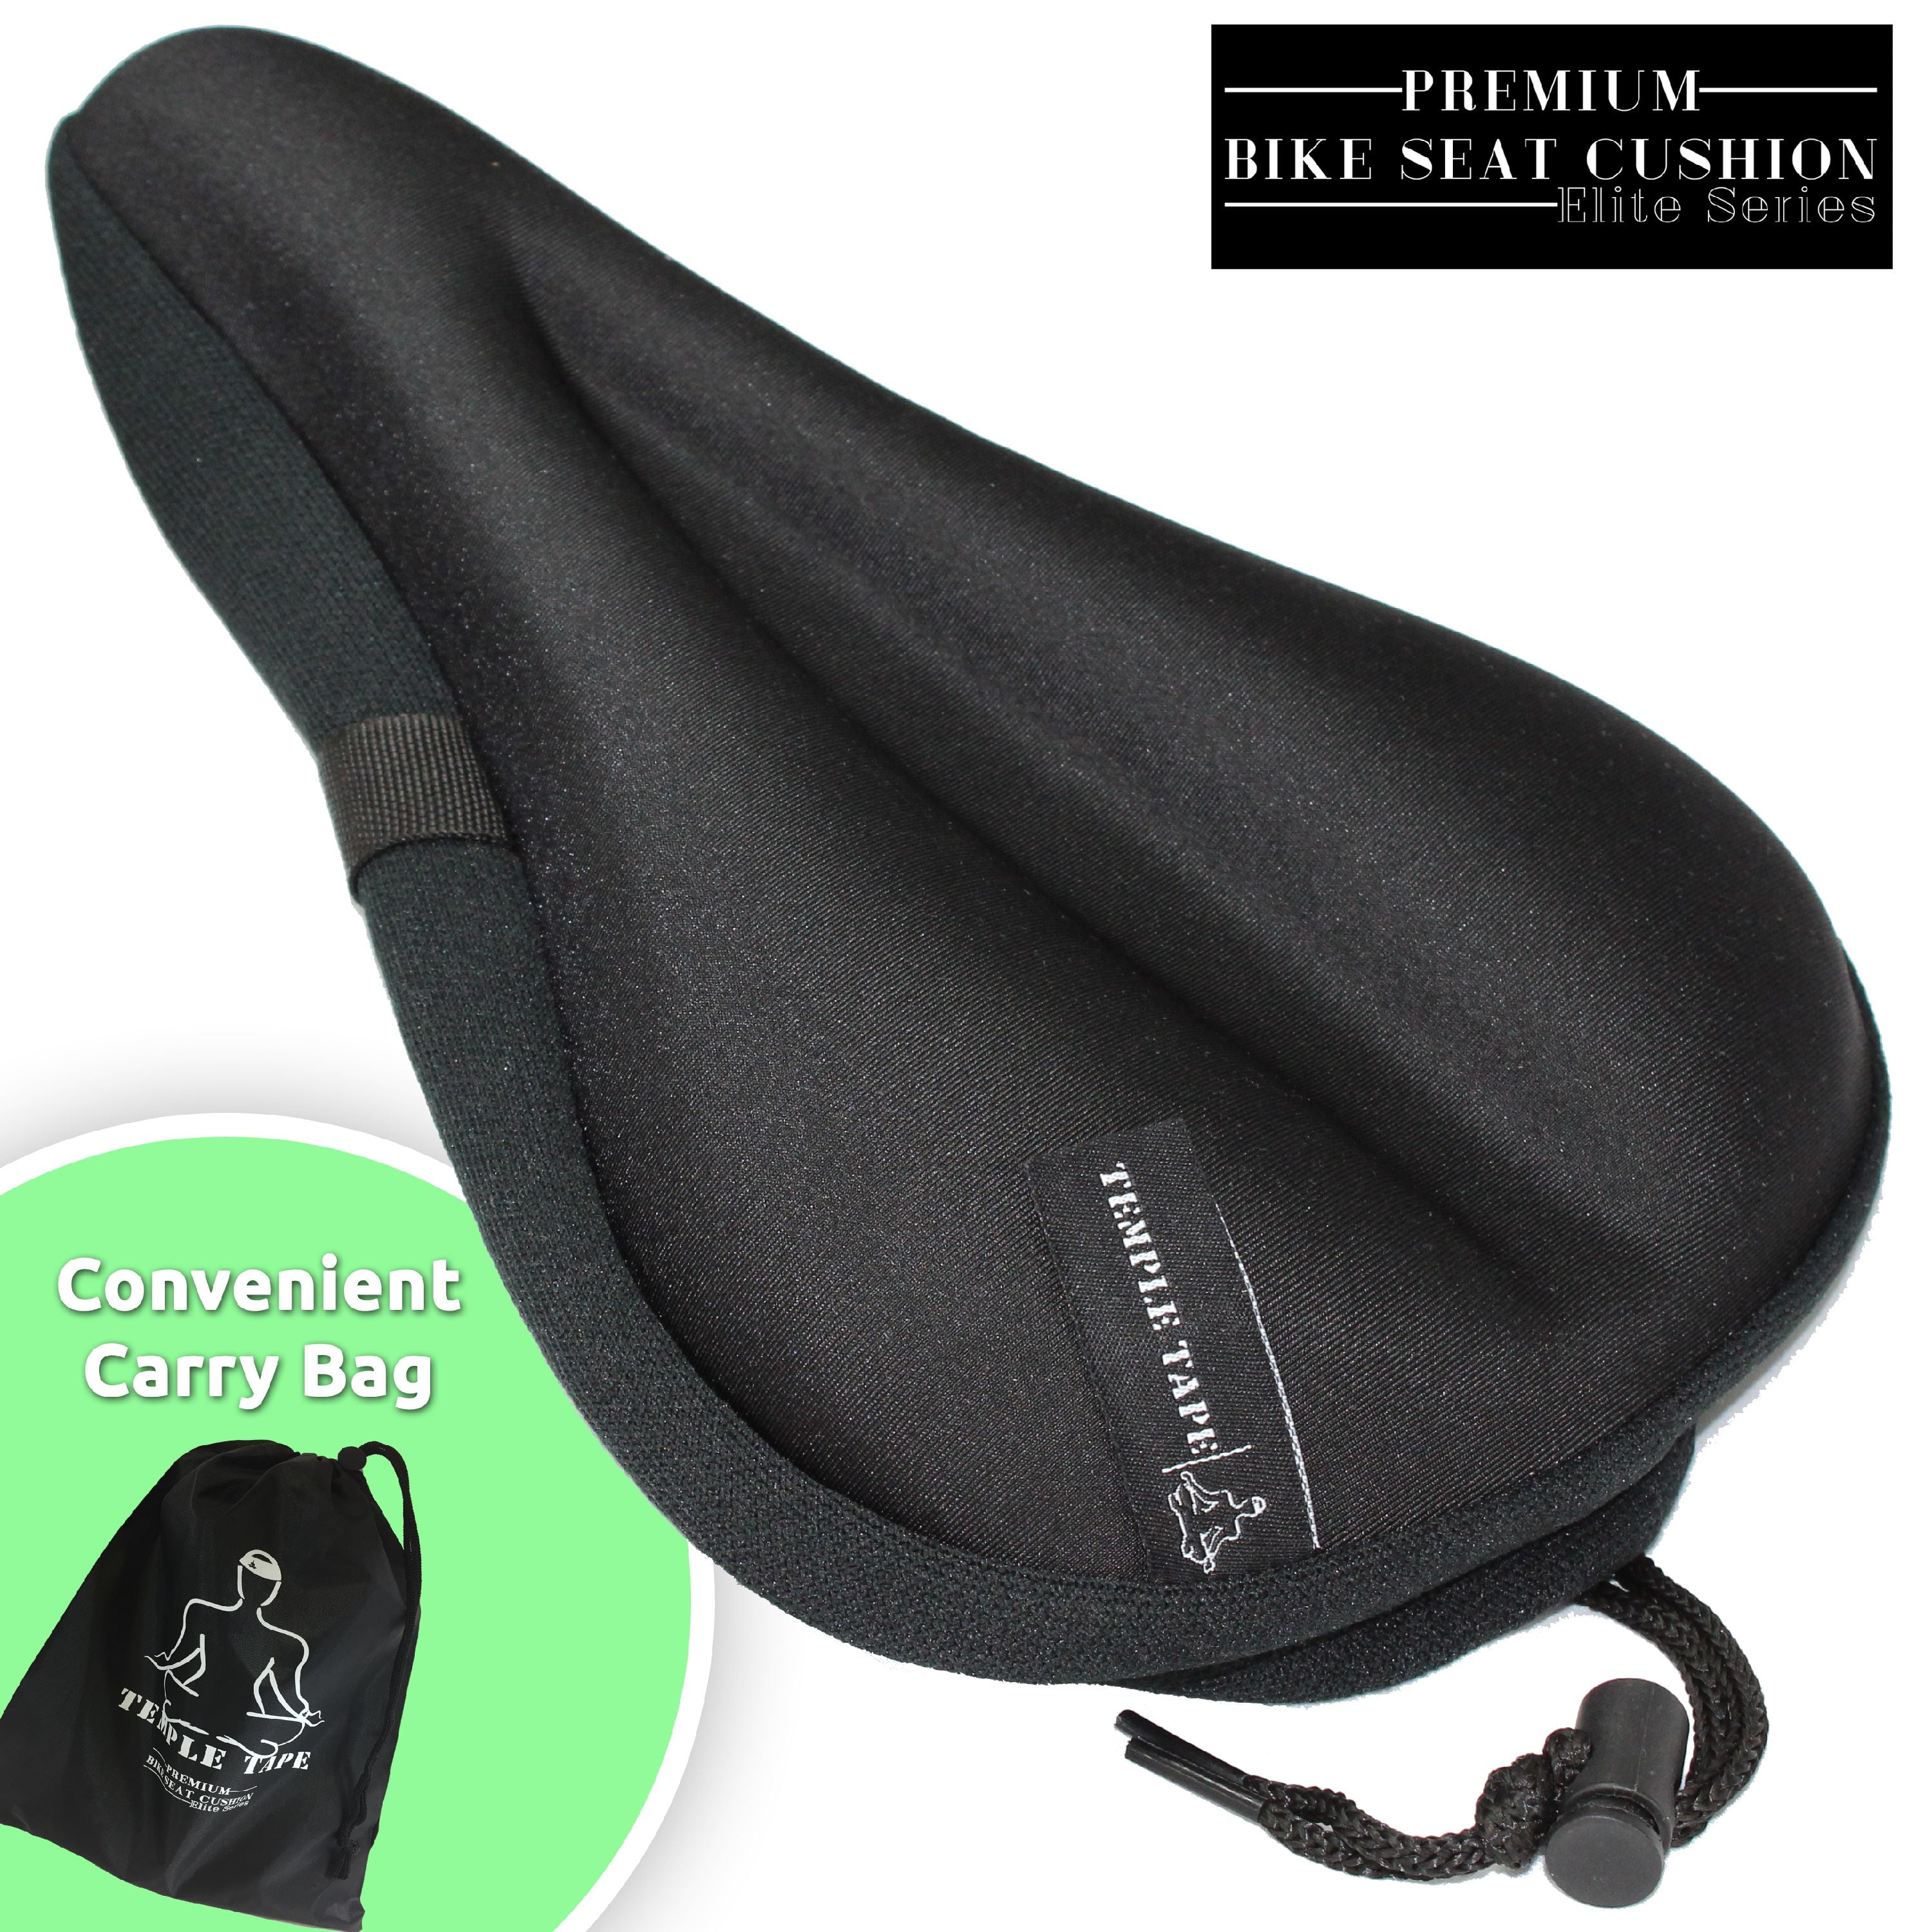 Spinning Class Indoor Cycling Extra Soft Memory Foam Bicycle Saddle Cushion for Stationary Bikes BV Bike Seat Cover